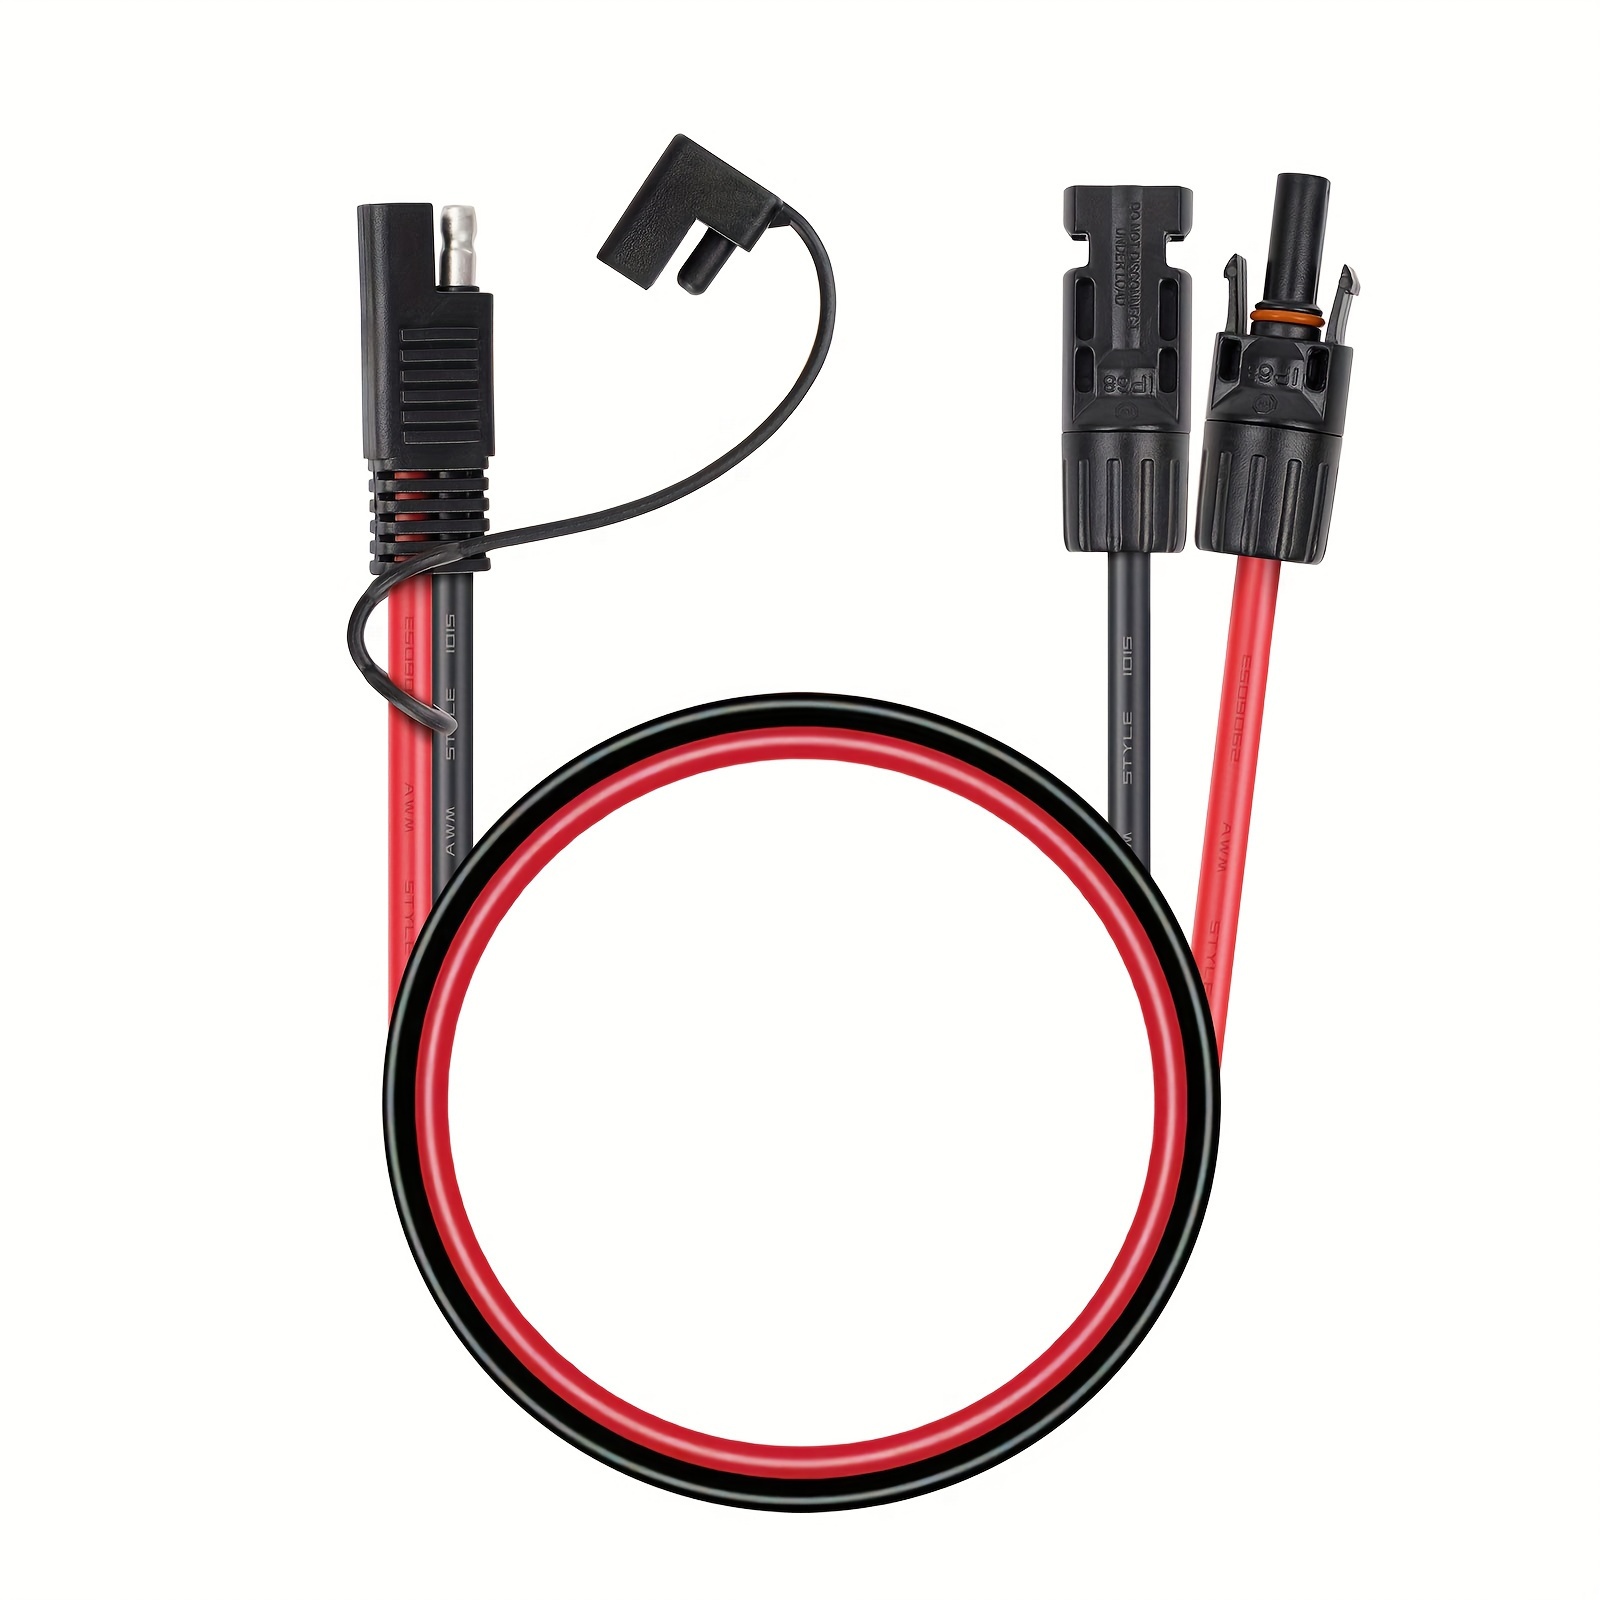 MC4 to DC Adapter Cable | 6FT